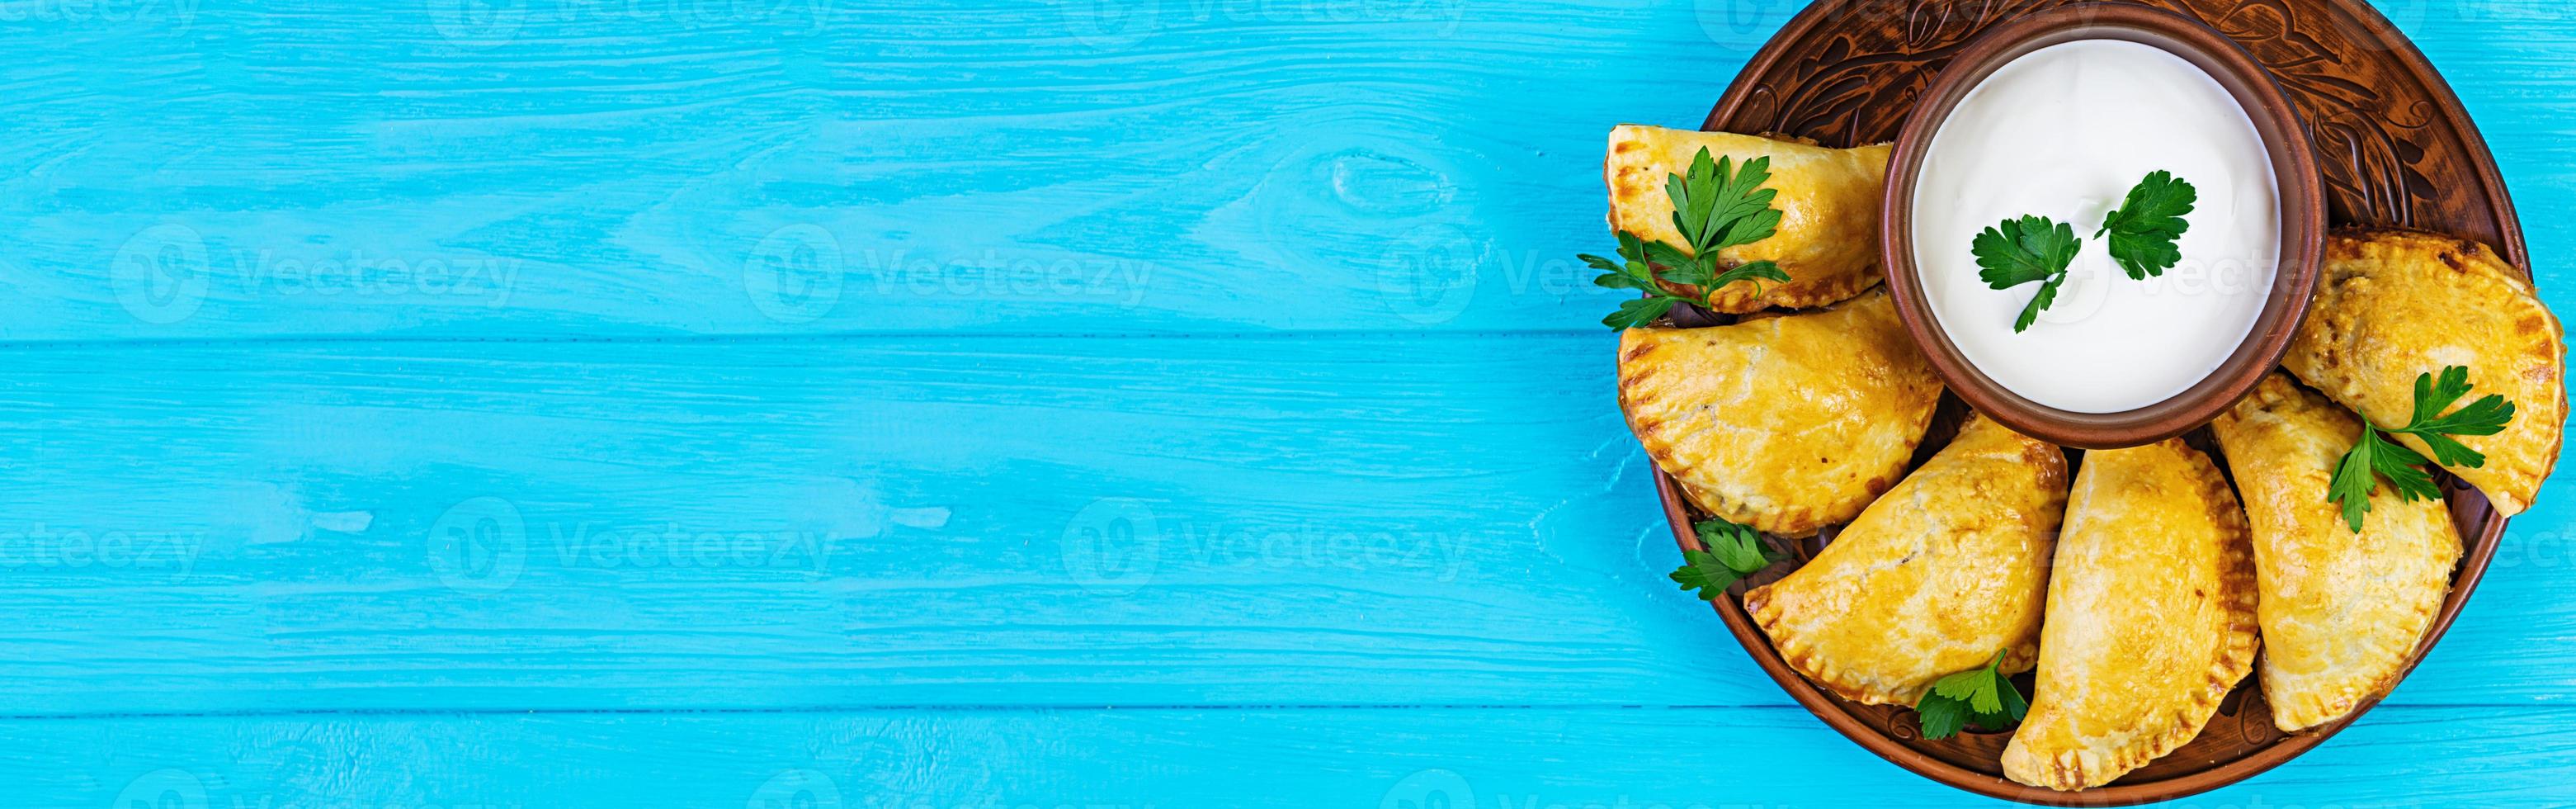 Delicious baked empanadas on wooden background. Top view. Banner. photo